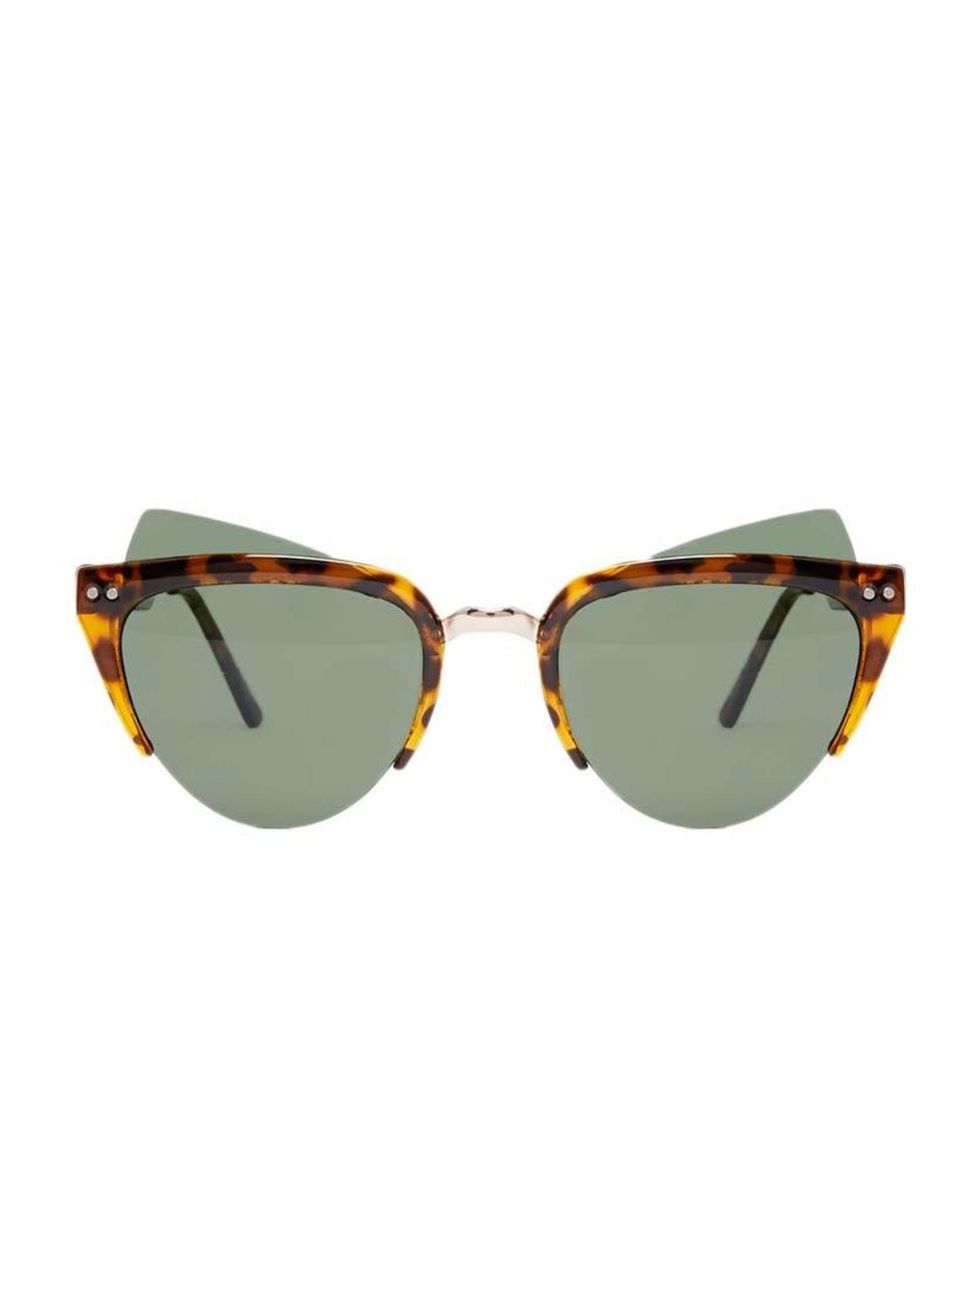 <p>Part librarian, part catwoman.</p>

<p>Spitfire sunglasses, £25 at <a href="http://www.asos.com/Spitfire/Spitfire-Chelses-Mod-Cat-Eye-Sunglasses/Prod/pgeproduct.aspx?iid=4984905&cid=6992&Rf900=1589&sh=0&pge=0&pgesize=36&sort=-1&clr=Tort&totalstyles=11&